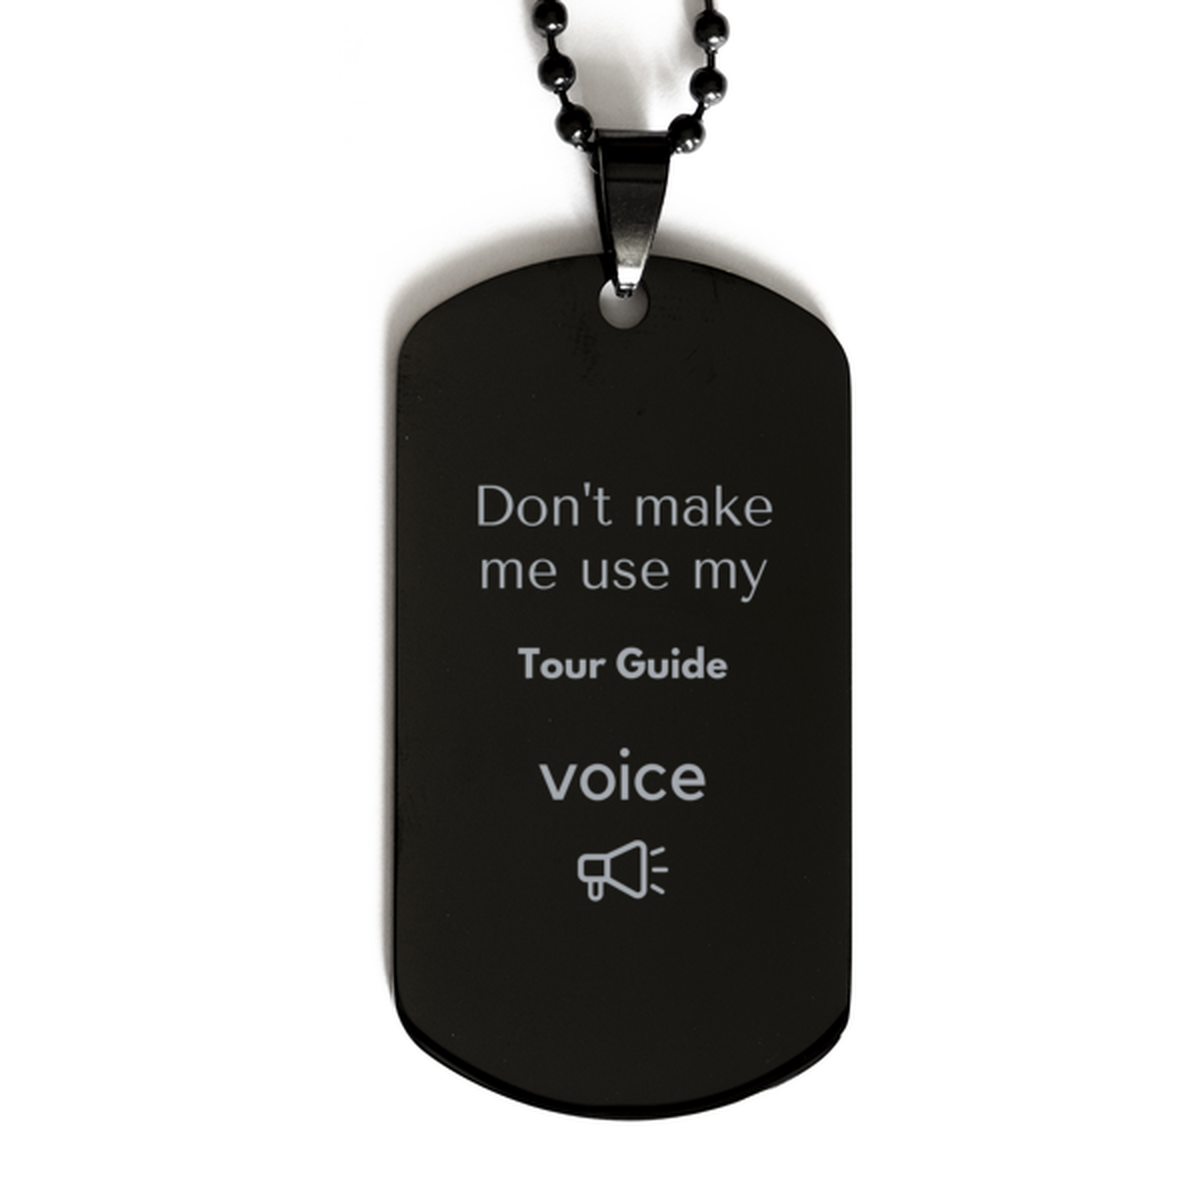 Don't make me use my Tour Guide voice, Sarcasm Tour Guide Gifts, Christmas Tour Guide Black Dog Tag Birthday Unique Gifts For Tour Guide Coworkers, Men, Women, Colleague, Friends